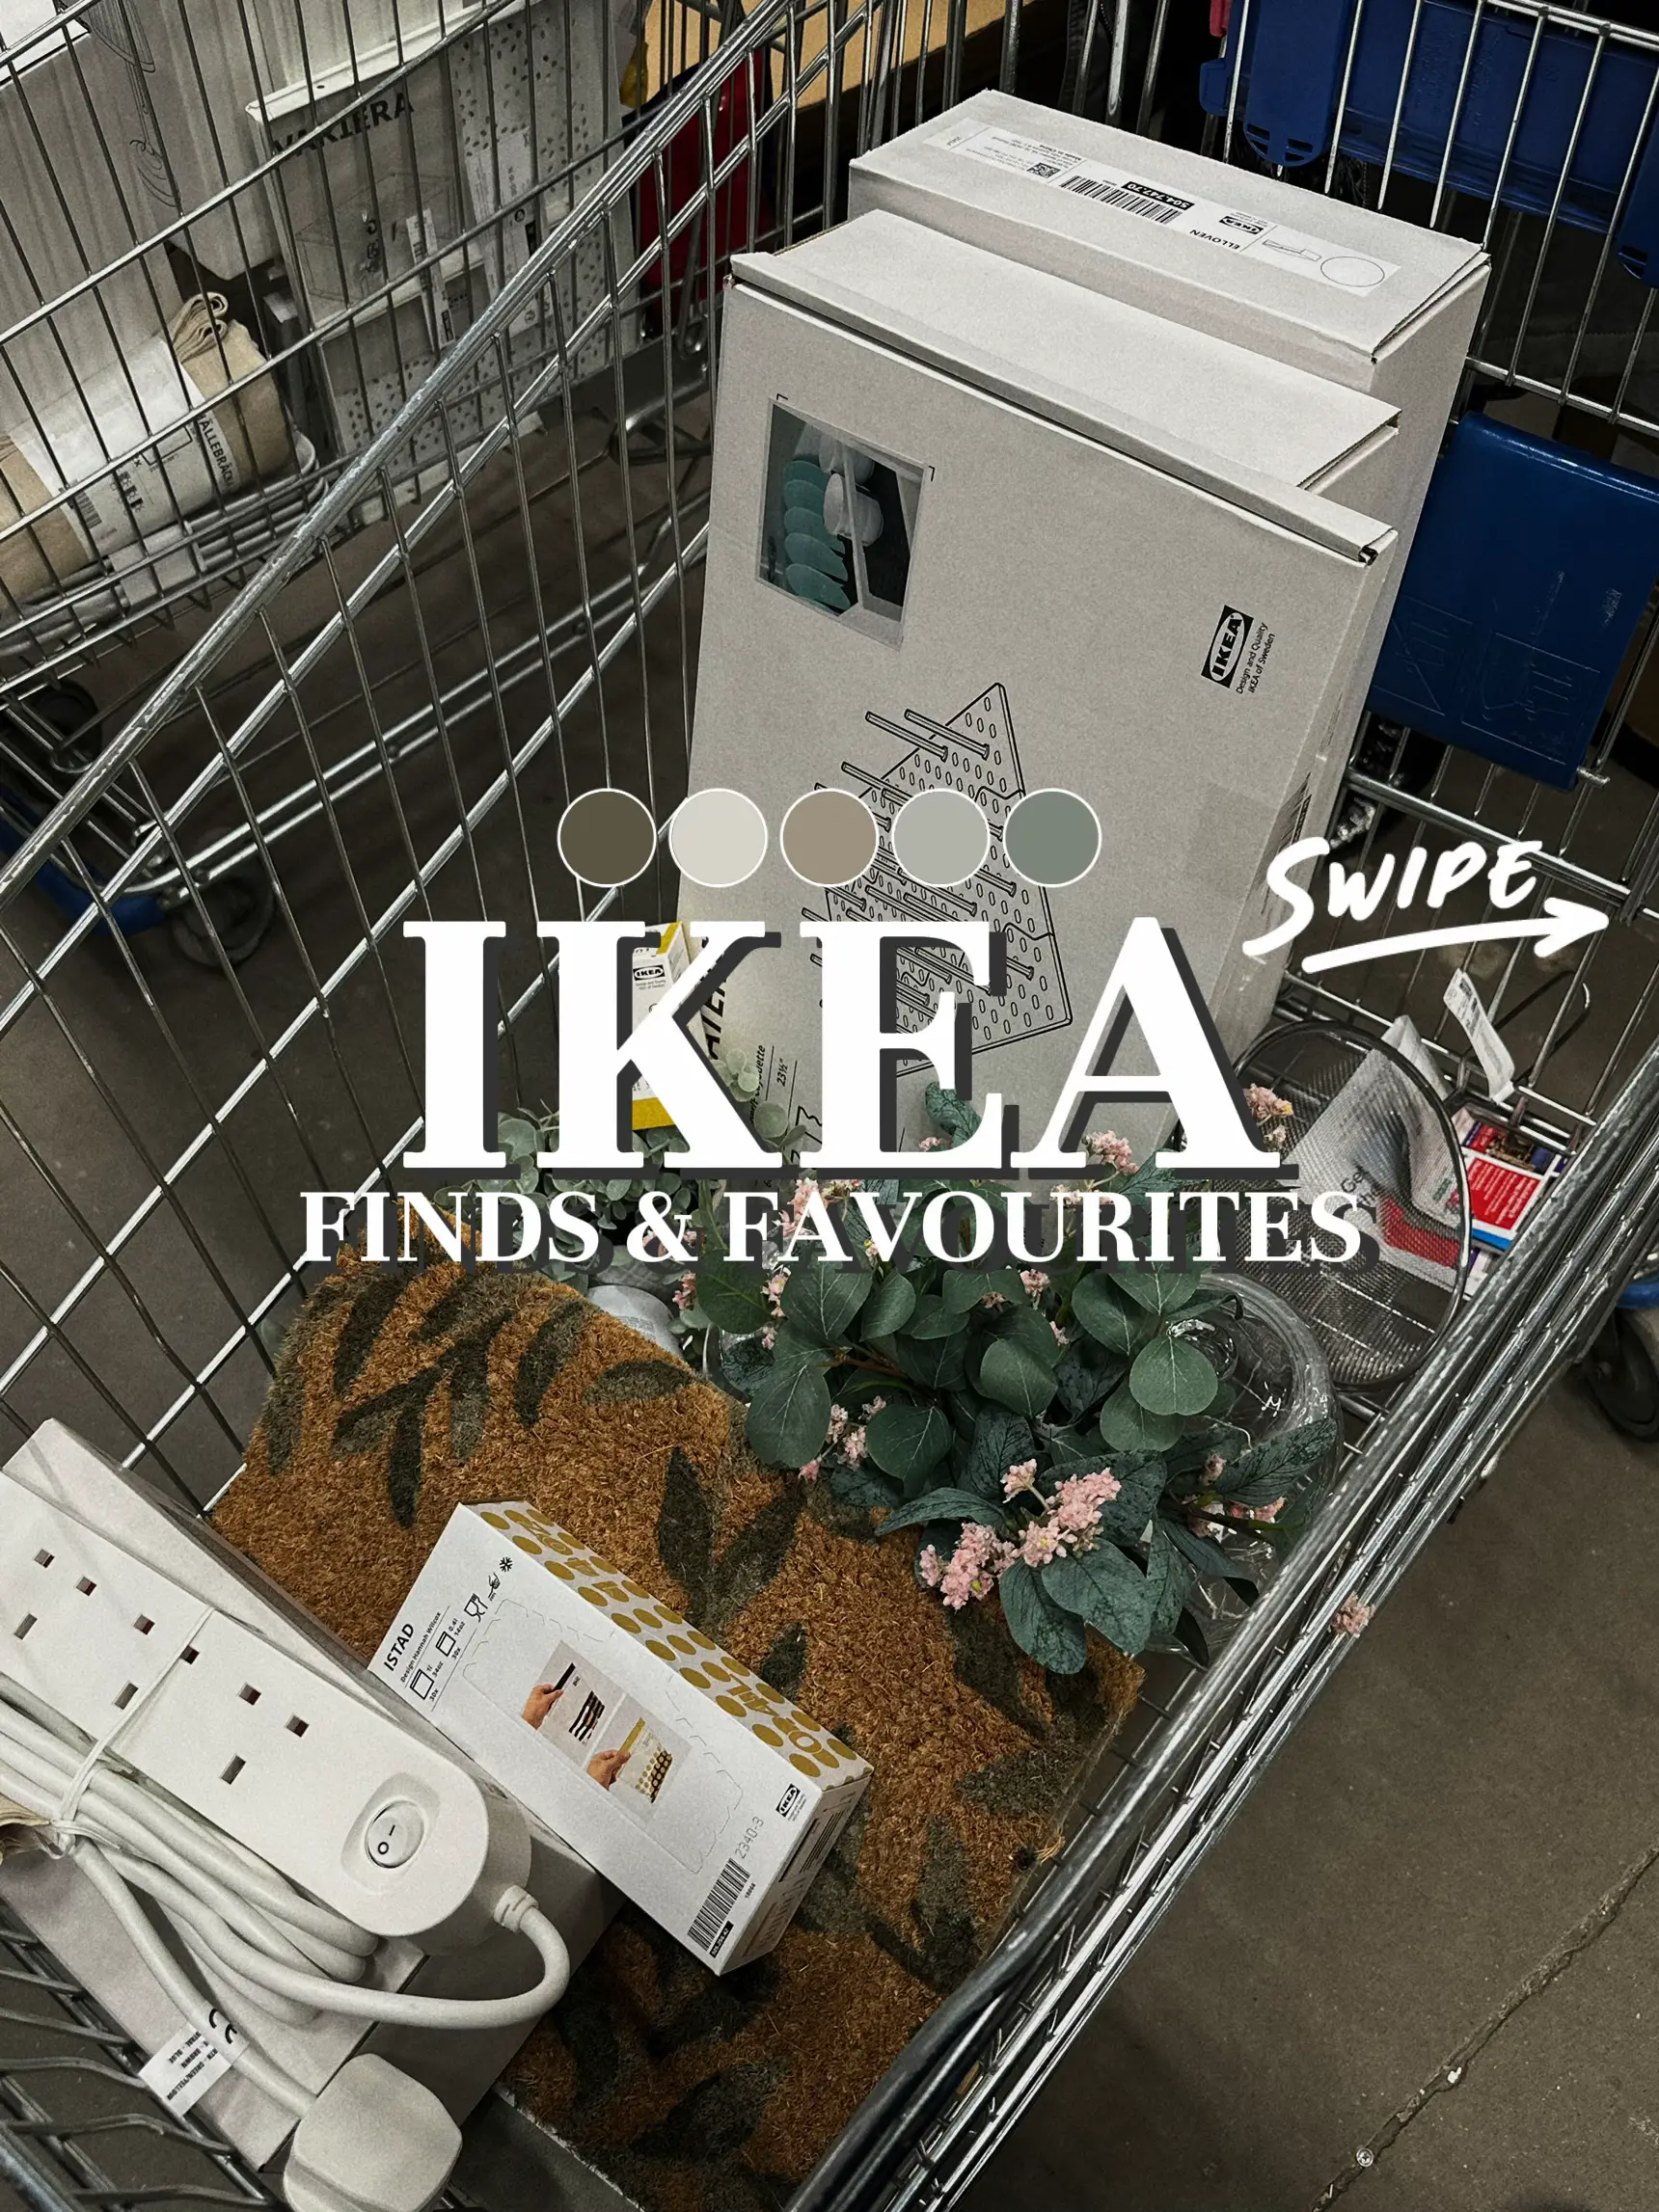 IKEA's SNURRAD has given me the most organized fridge ever